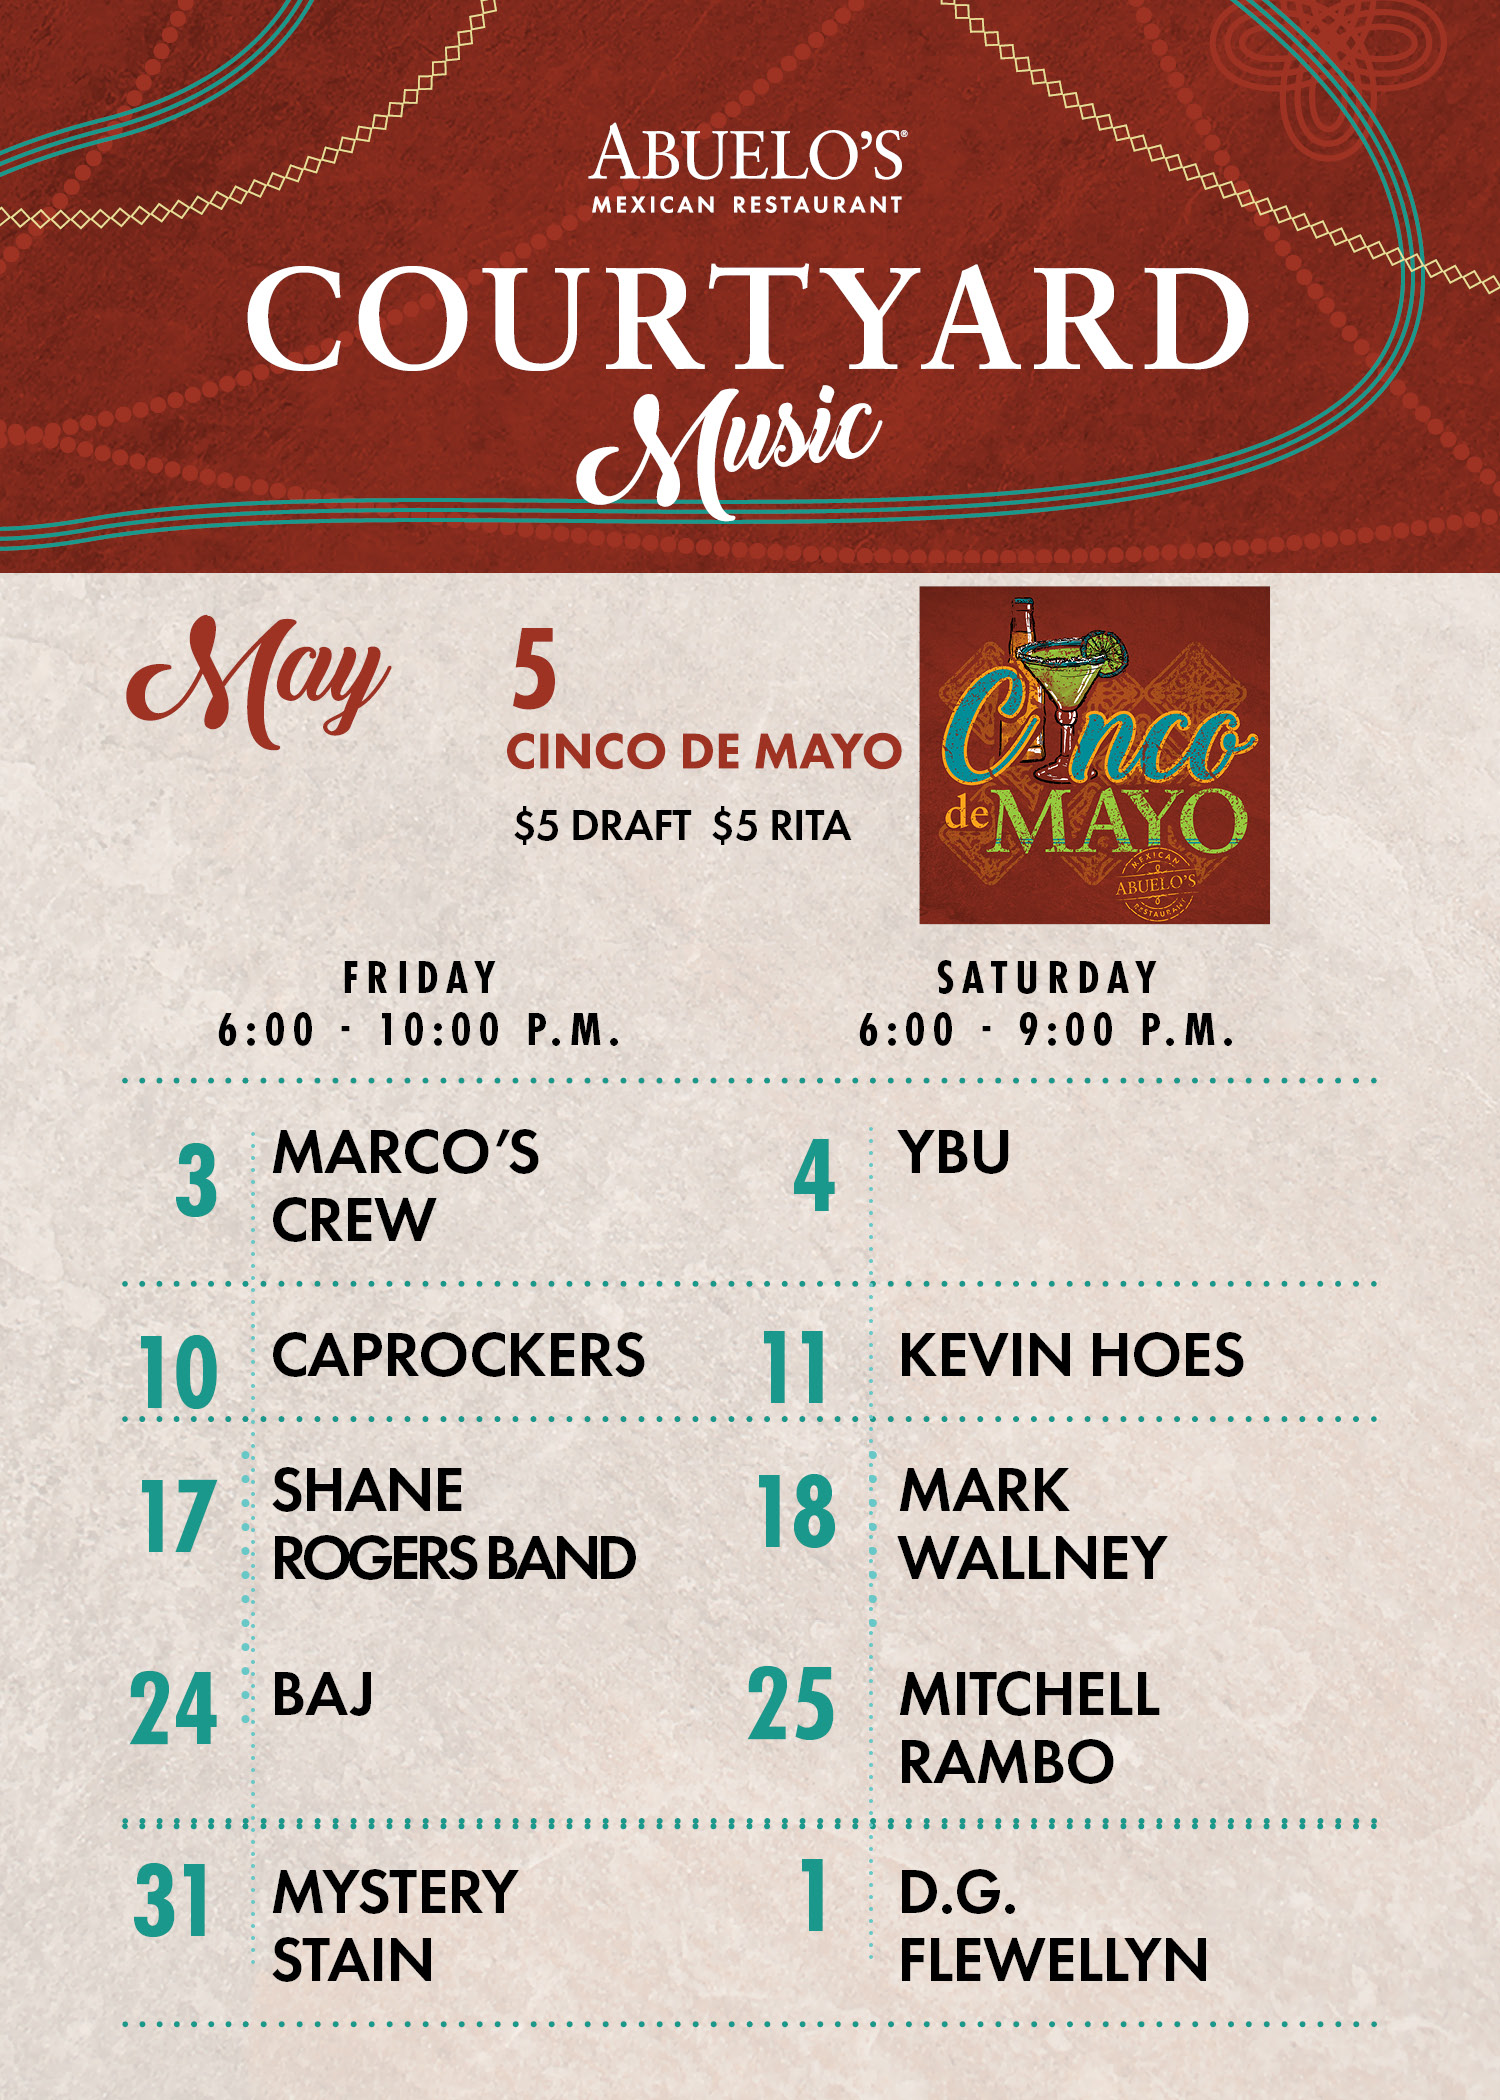 Abuelo's Live Music in the Courtyard, May schedule.